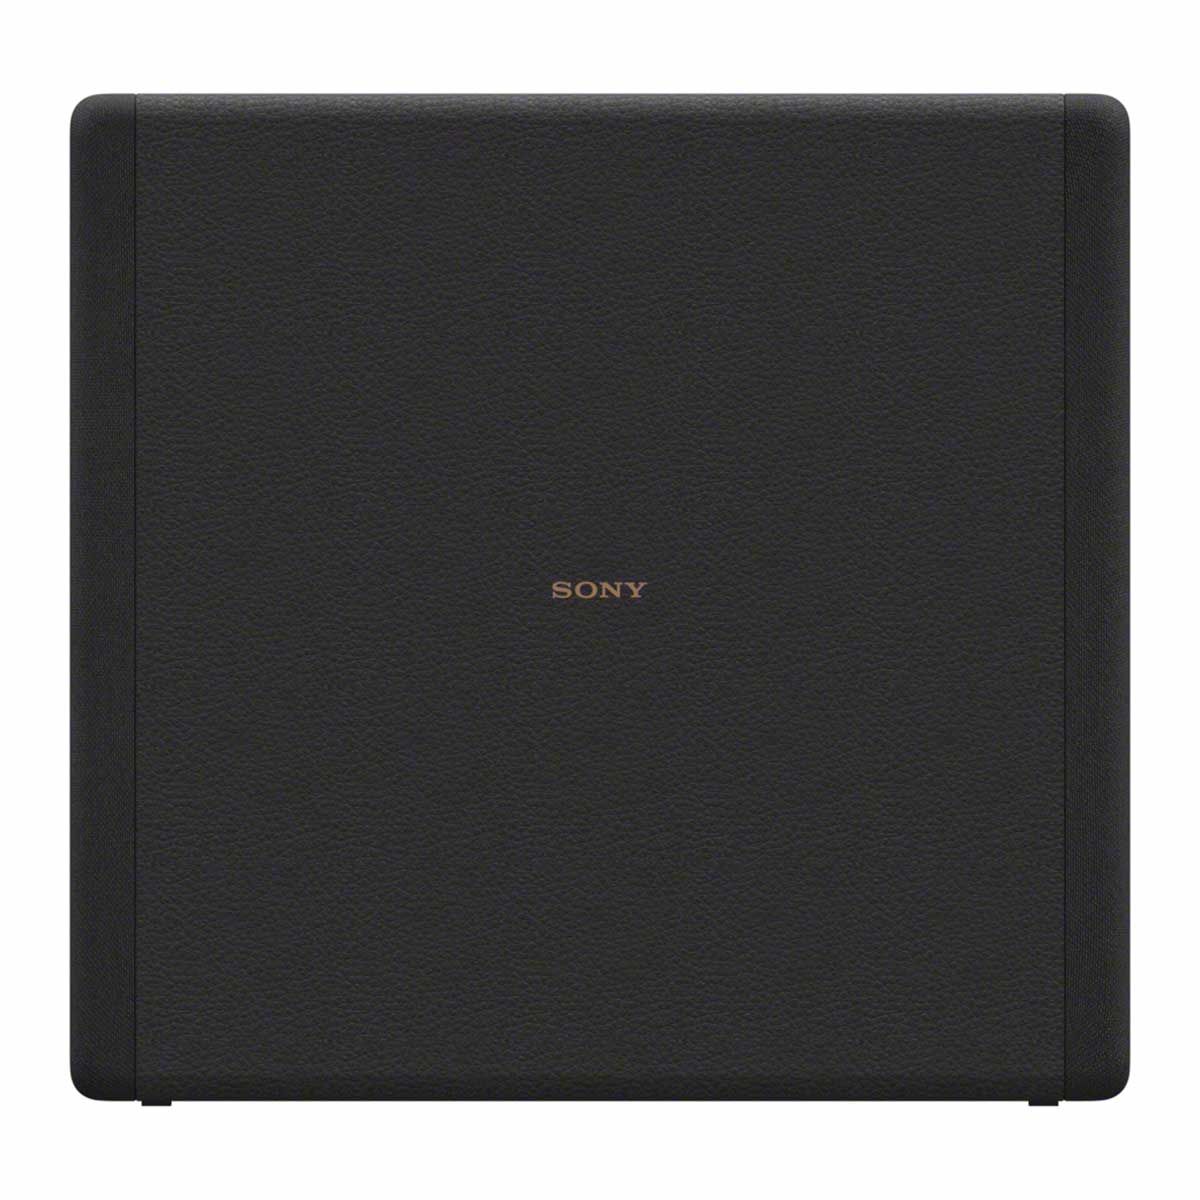 Sony SA-SW3 Wireless Subwoofer, side view